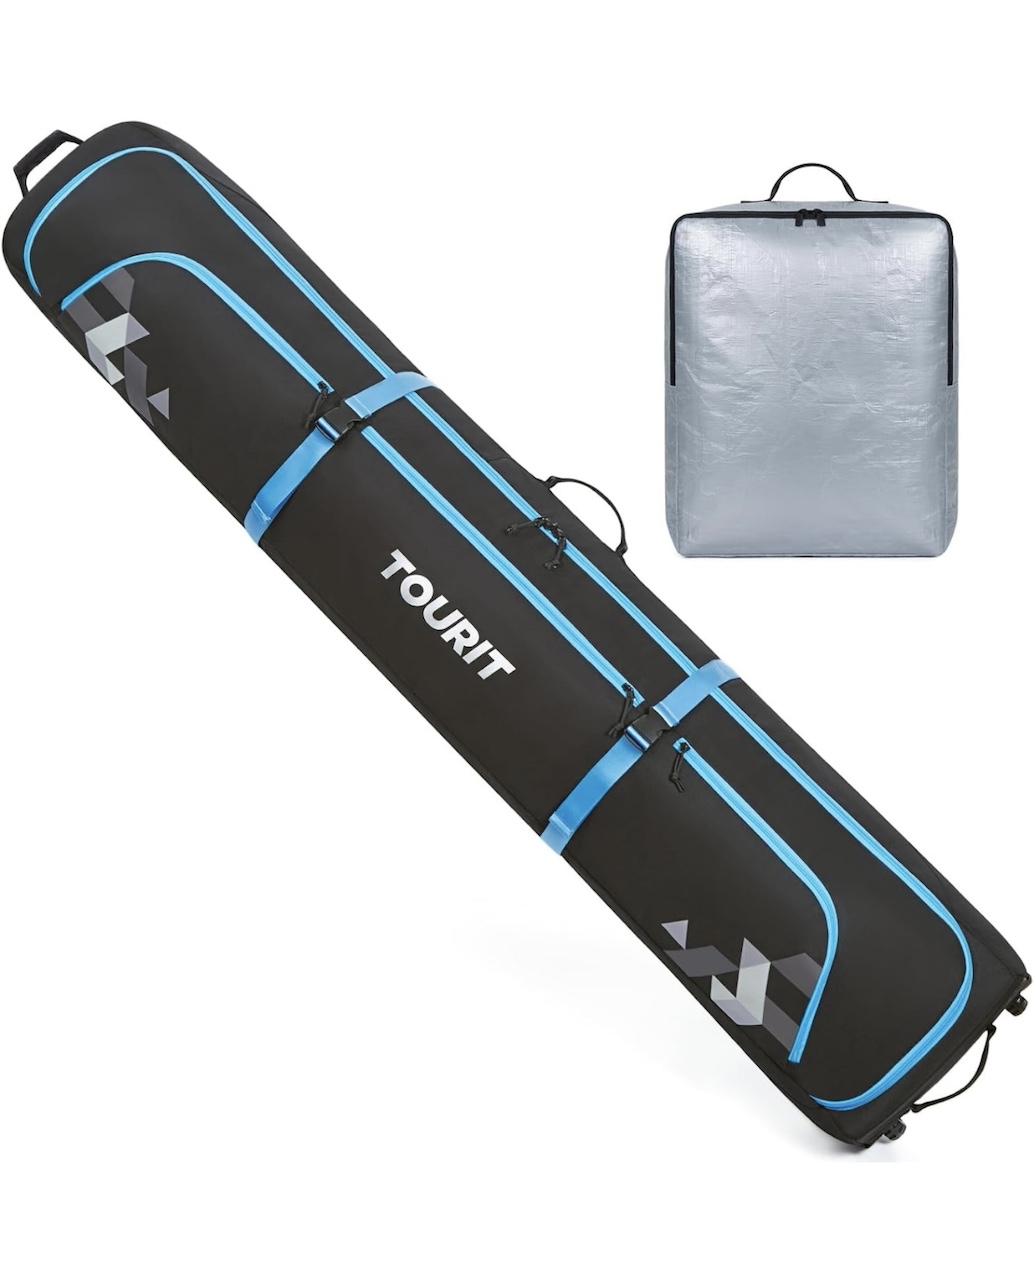 TOURIT Rolling Ski and Boot Bag Combo product image